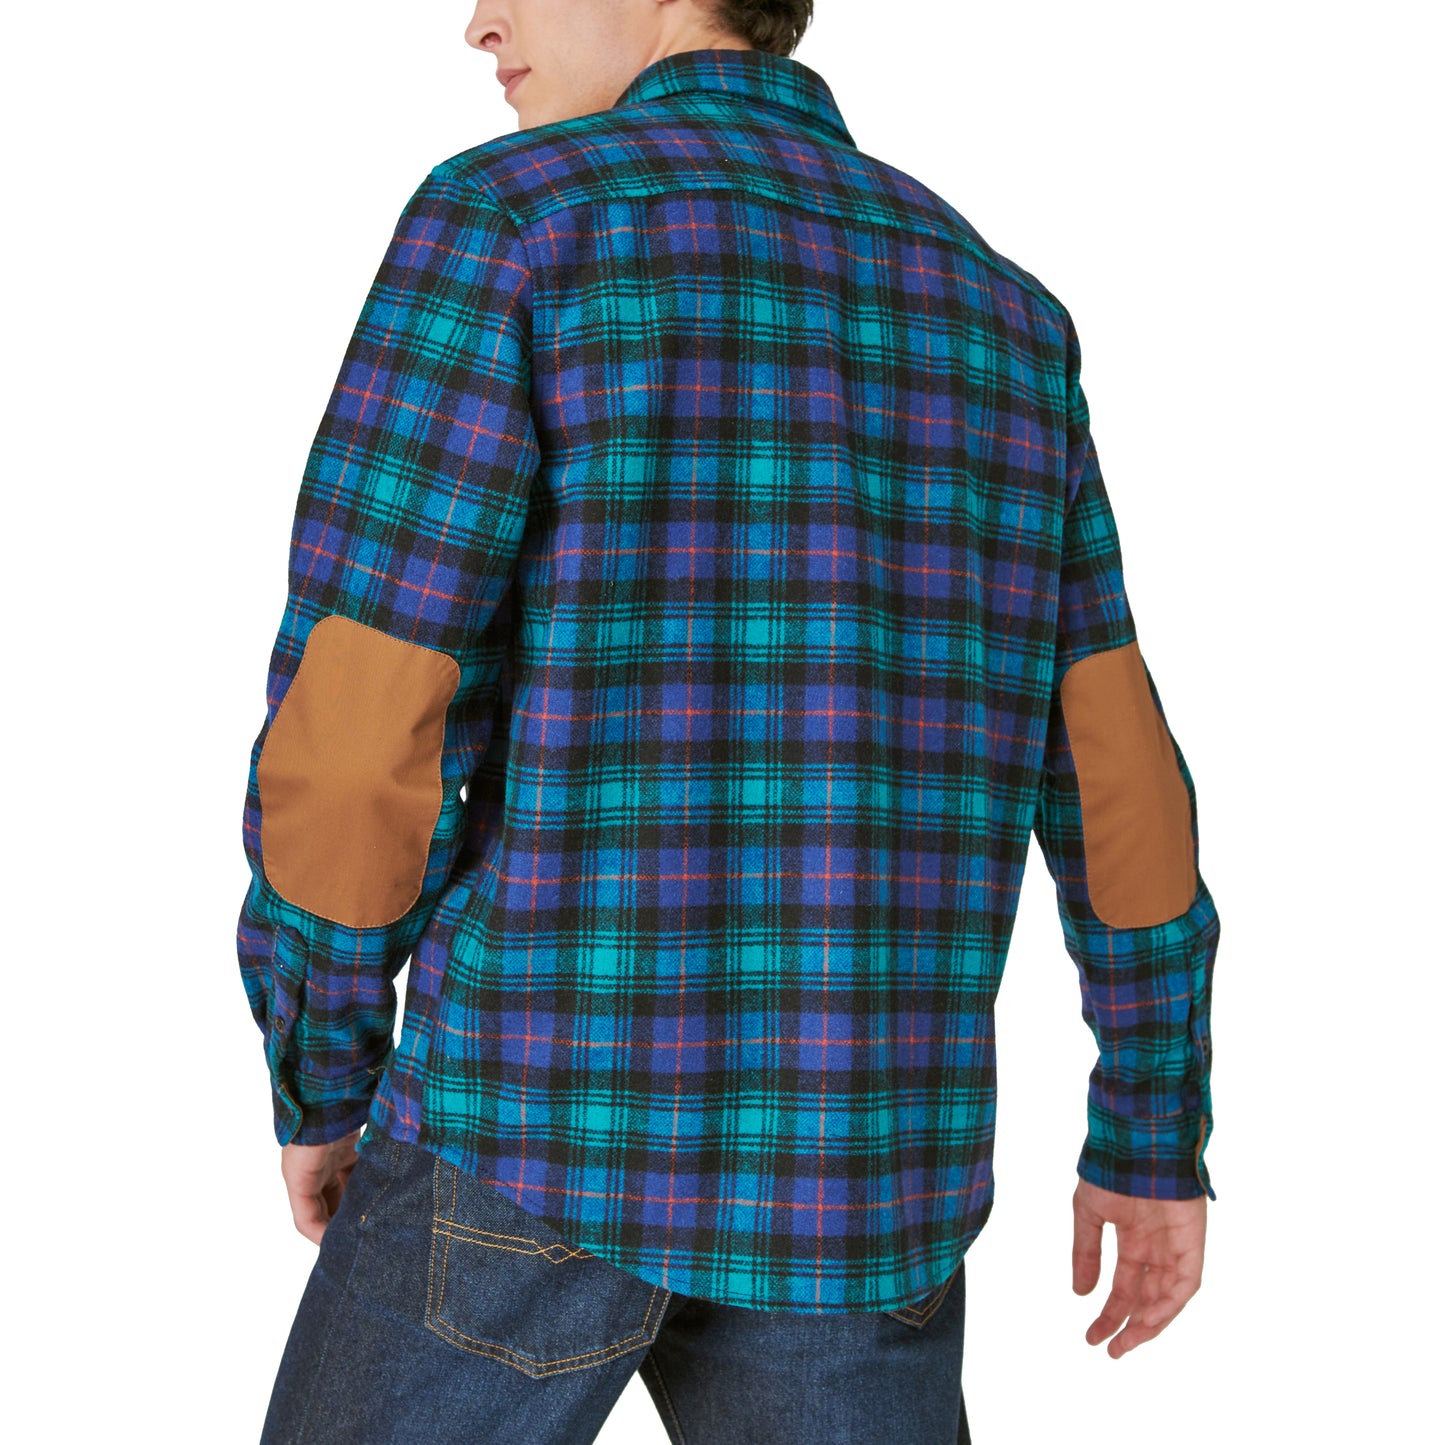 Guinness Webstore US limited edition men's flannel shirt: Guinness Wool Plaid Over Shirt With Elbow Patch - Green Plaid.